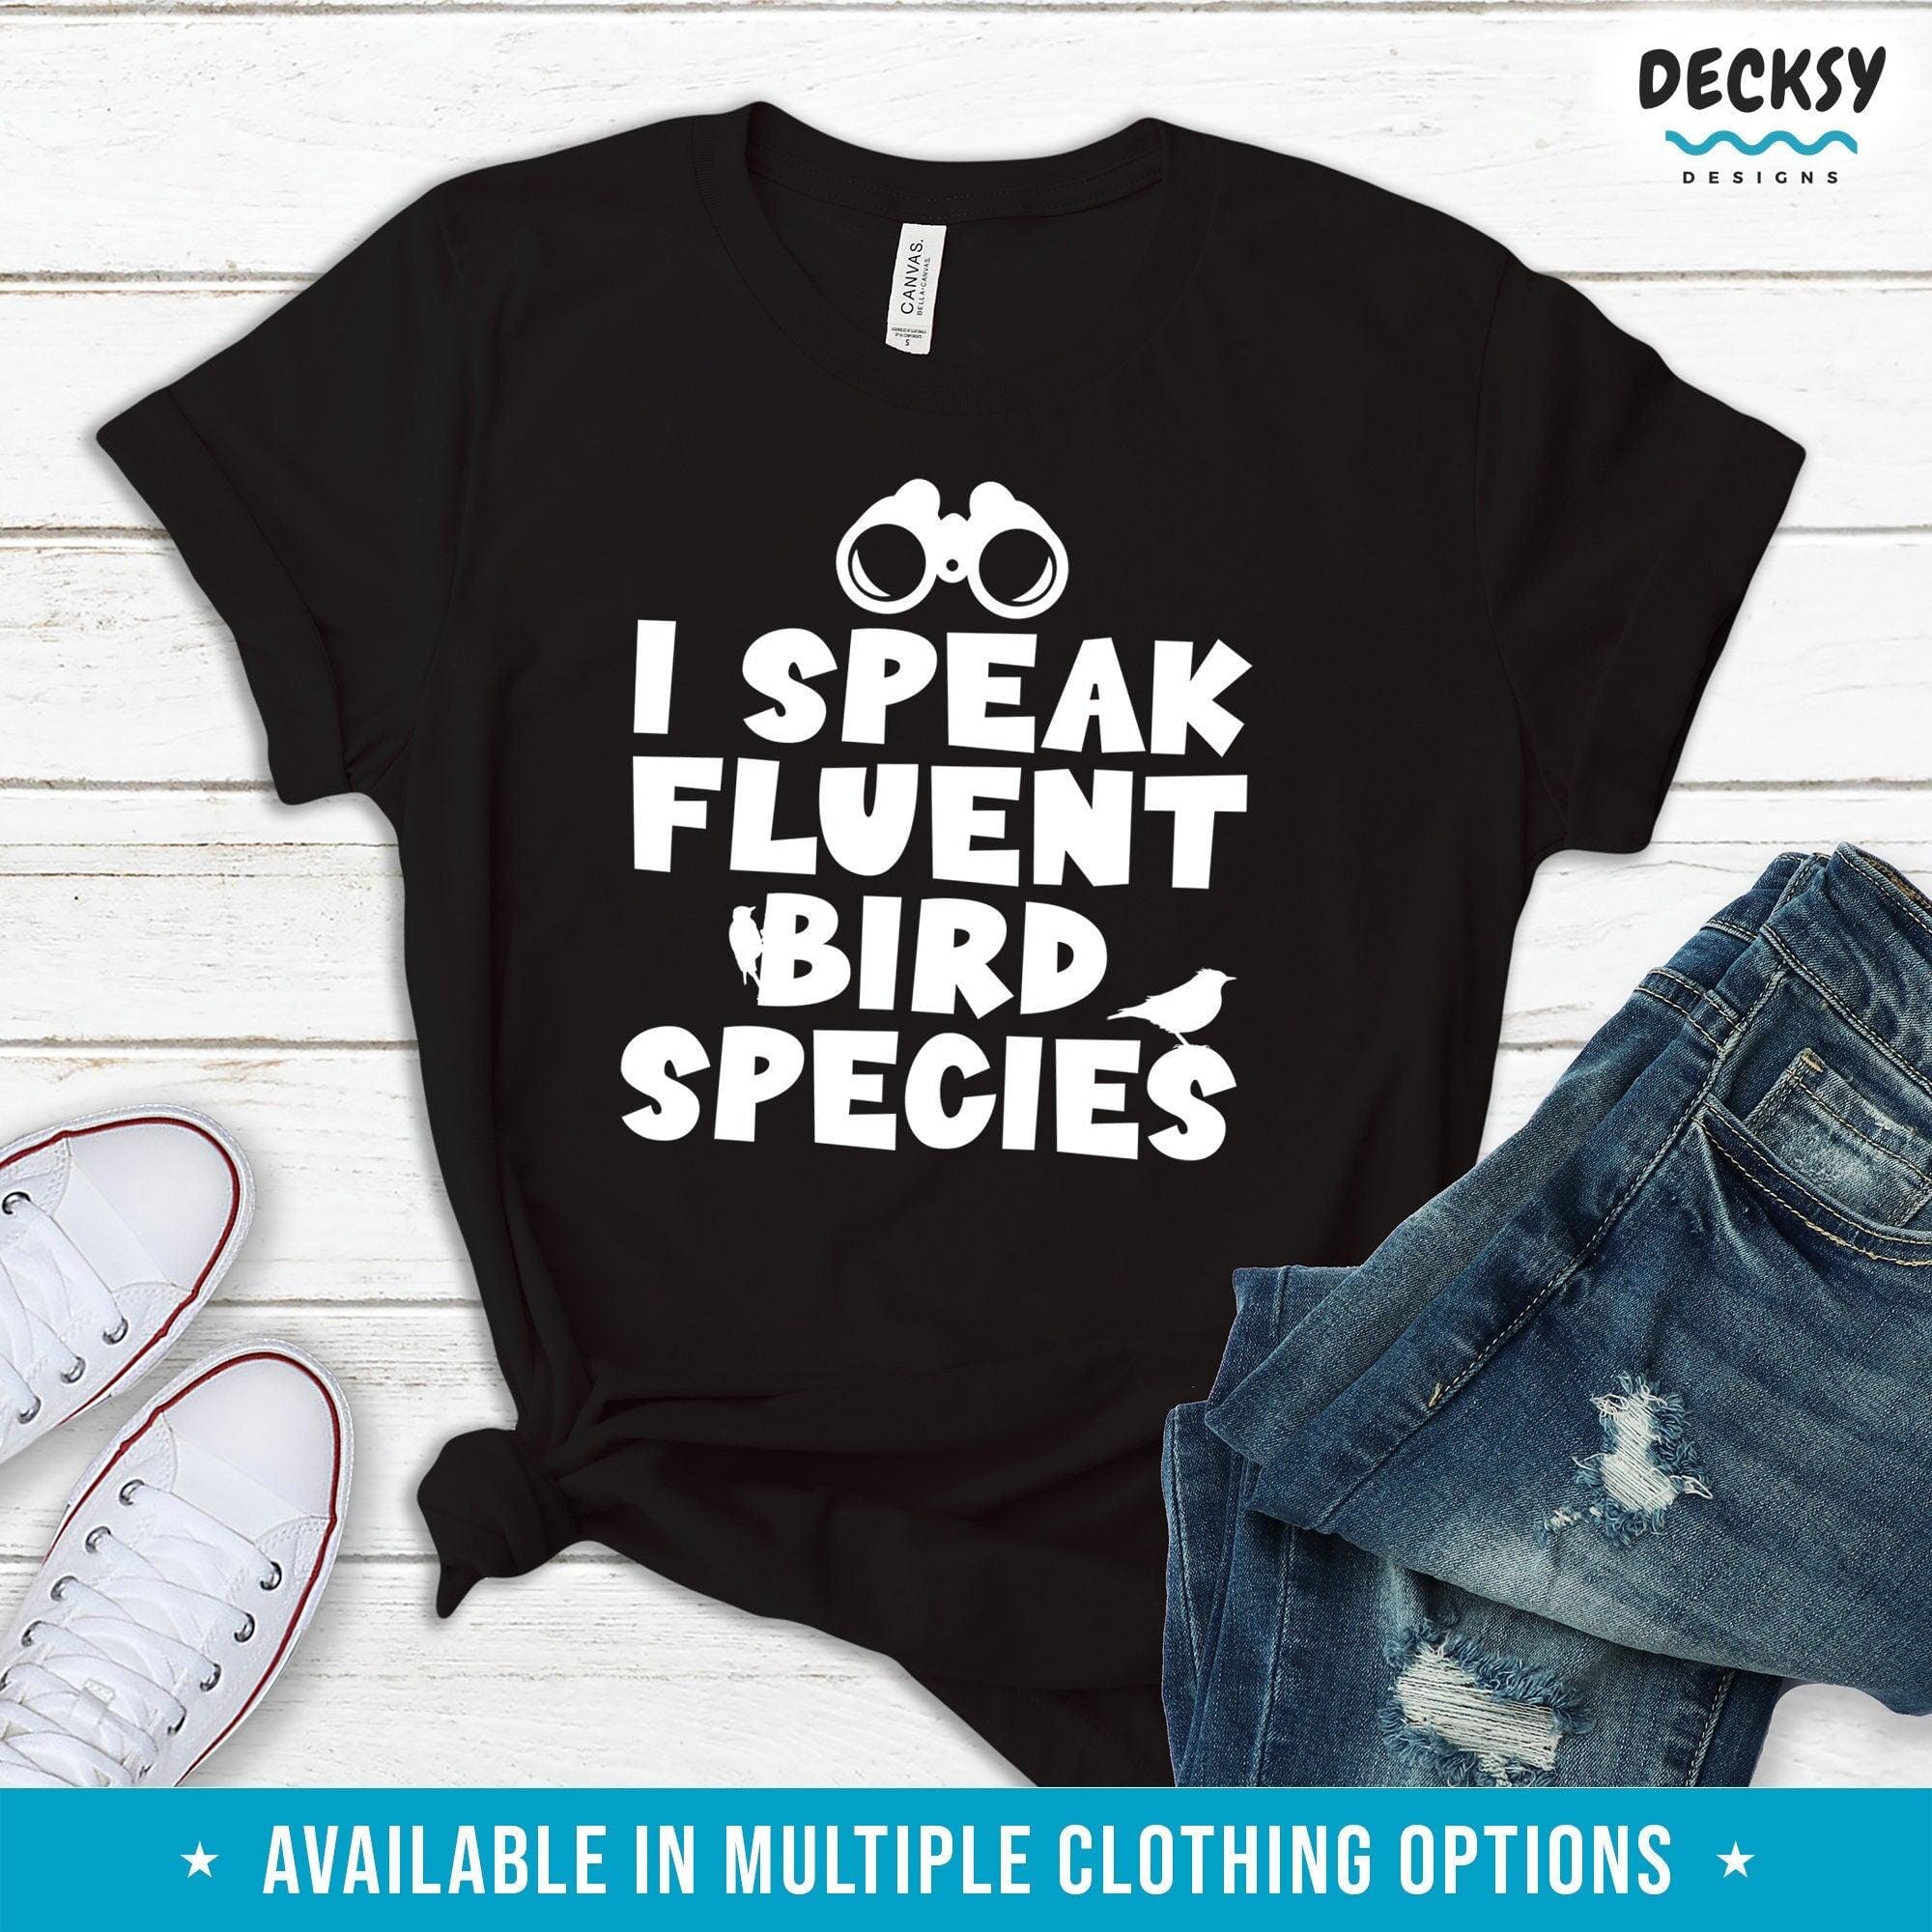 Bird Shirt, Gift For Bird Lover-Clothing:Gender-Neutral Adult Clothing:Tops & Tees:T-shirts:Graphic Tees-DecksyDesigns